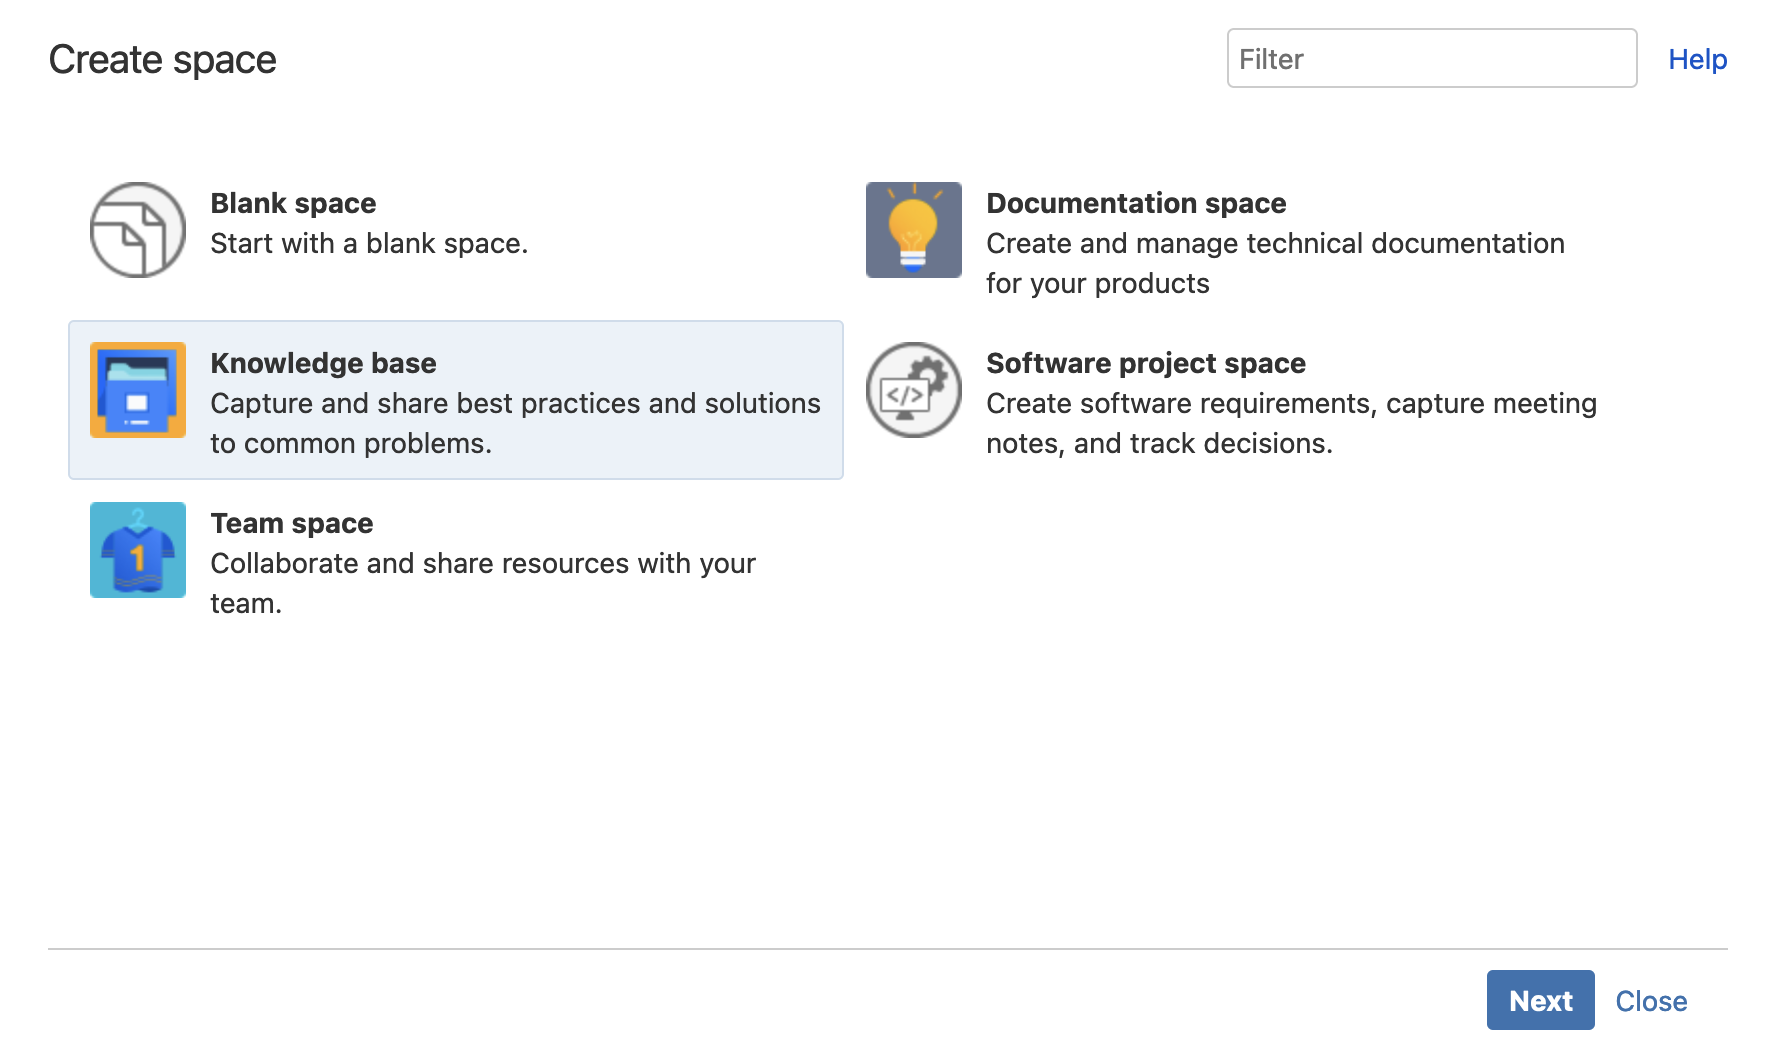 The software project space blueprint will only appear if you have linked Confluence to your Jira Software instance.